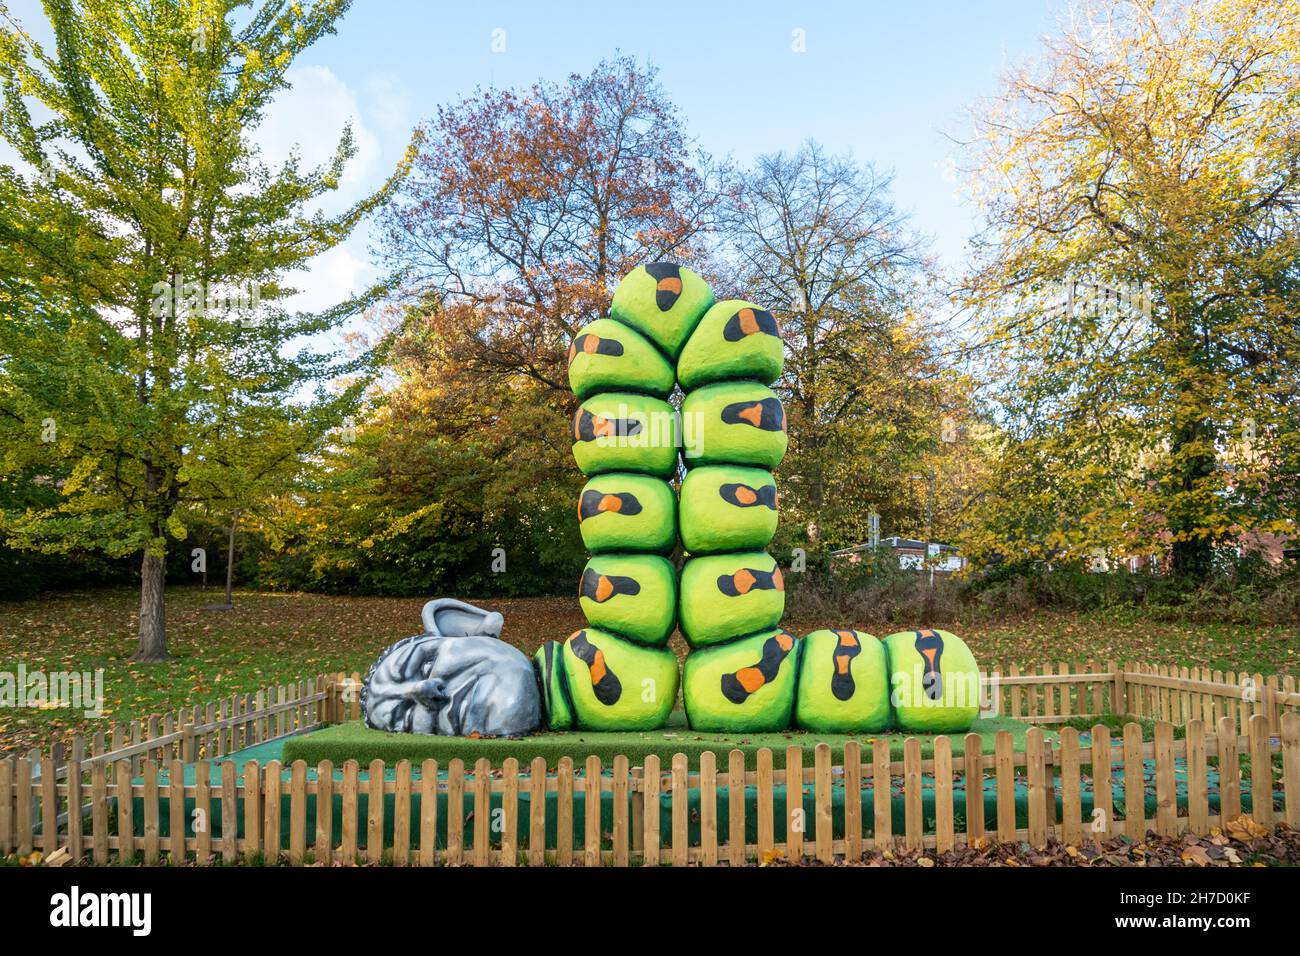 Alfie Bradley caterpillar sculpture with human head in Dale End Park in Ironbridge, Shropshire, England, UK, during autumn or November Stock Photo